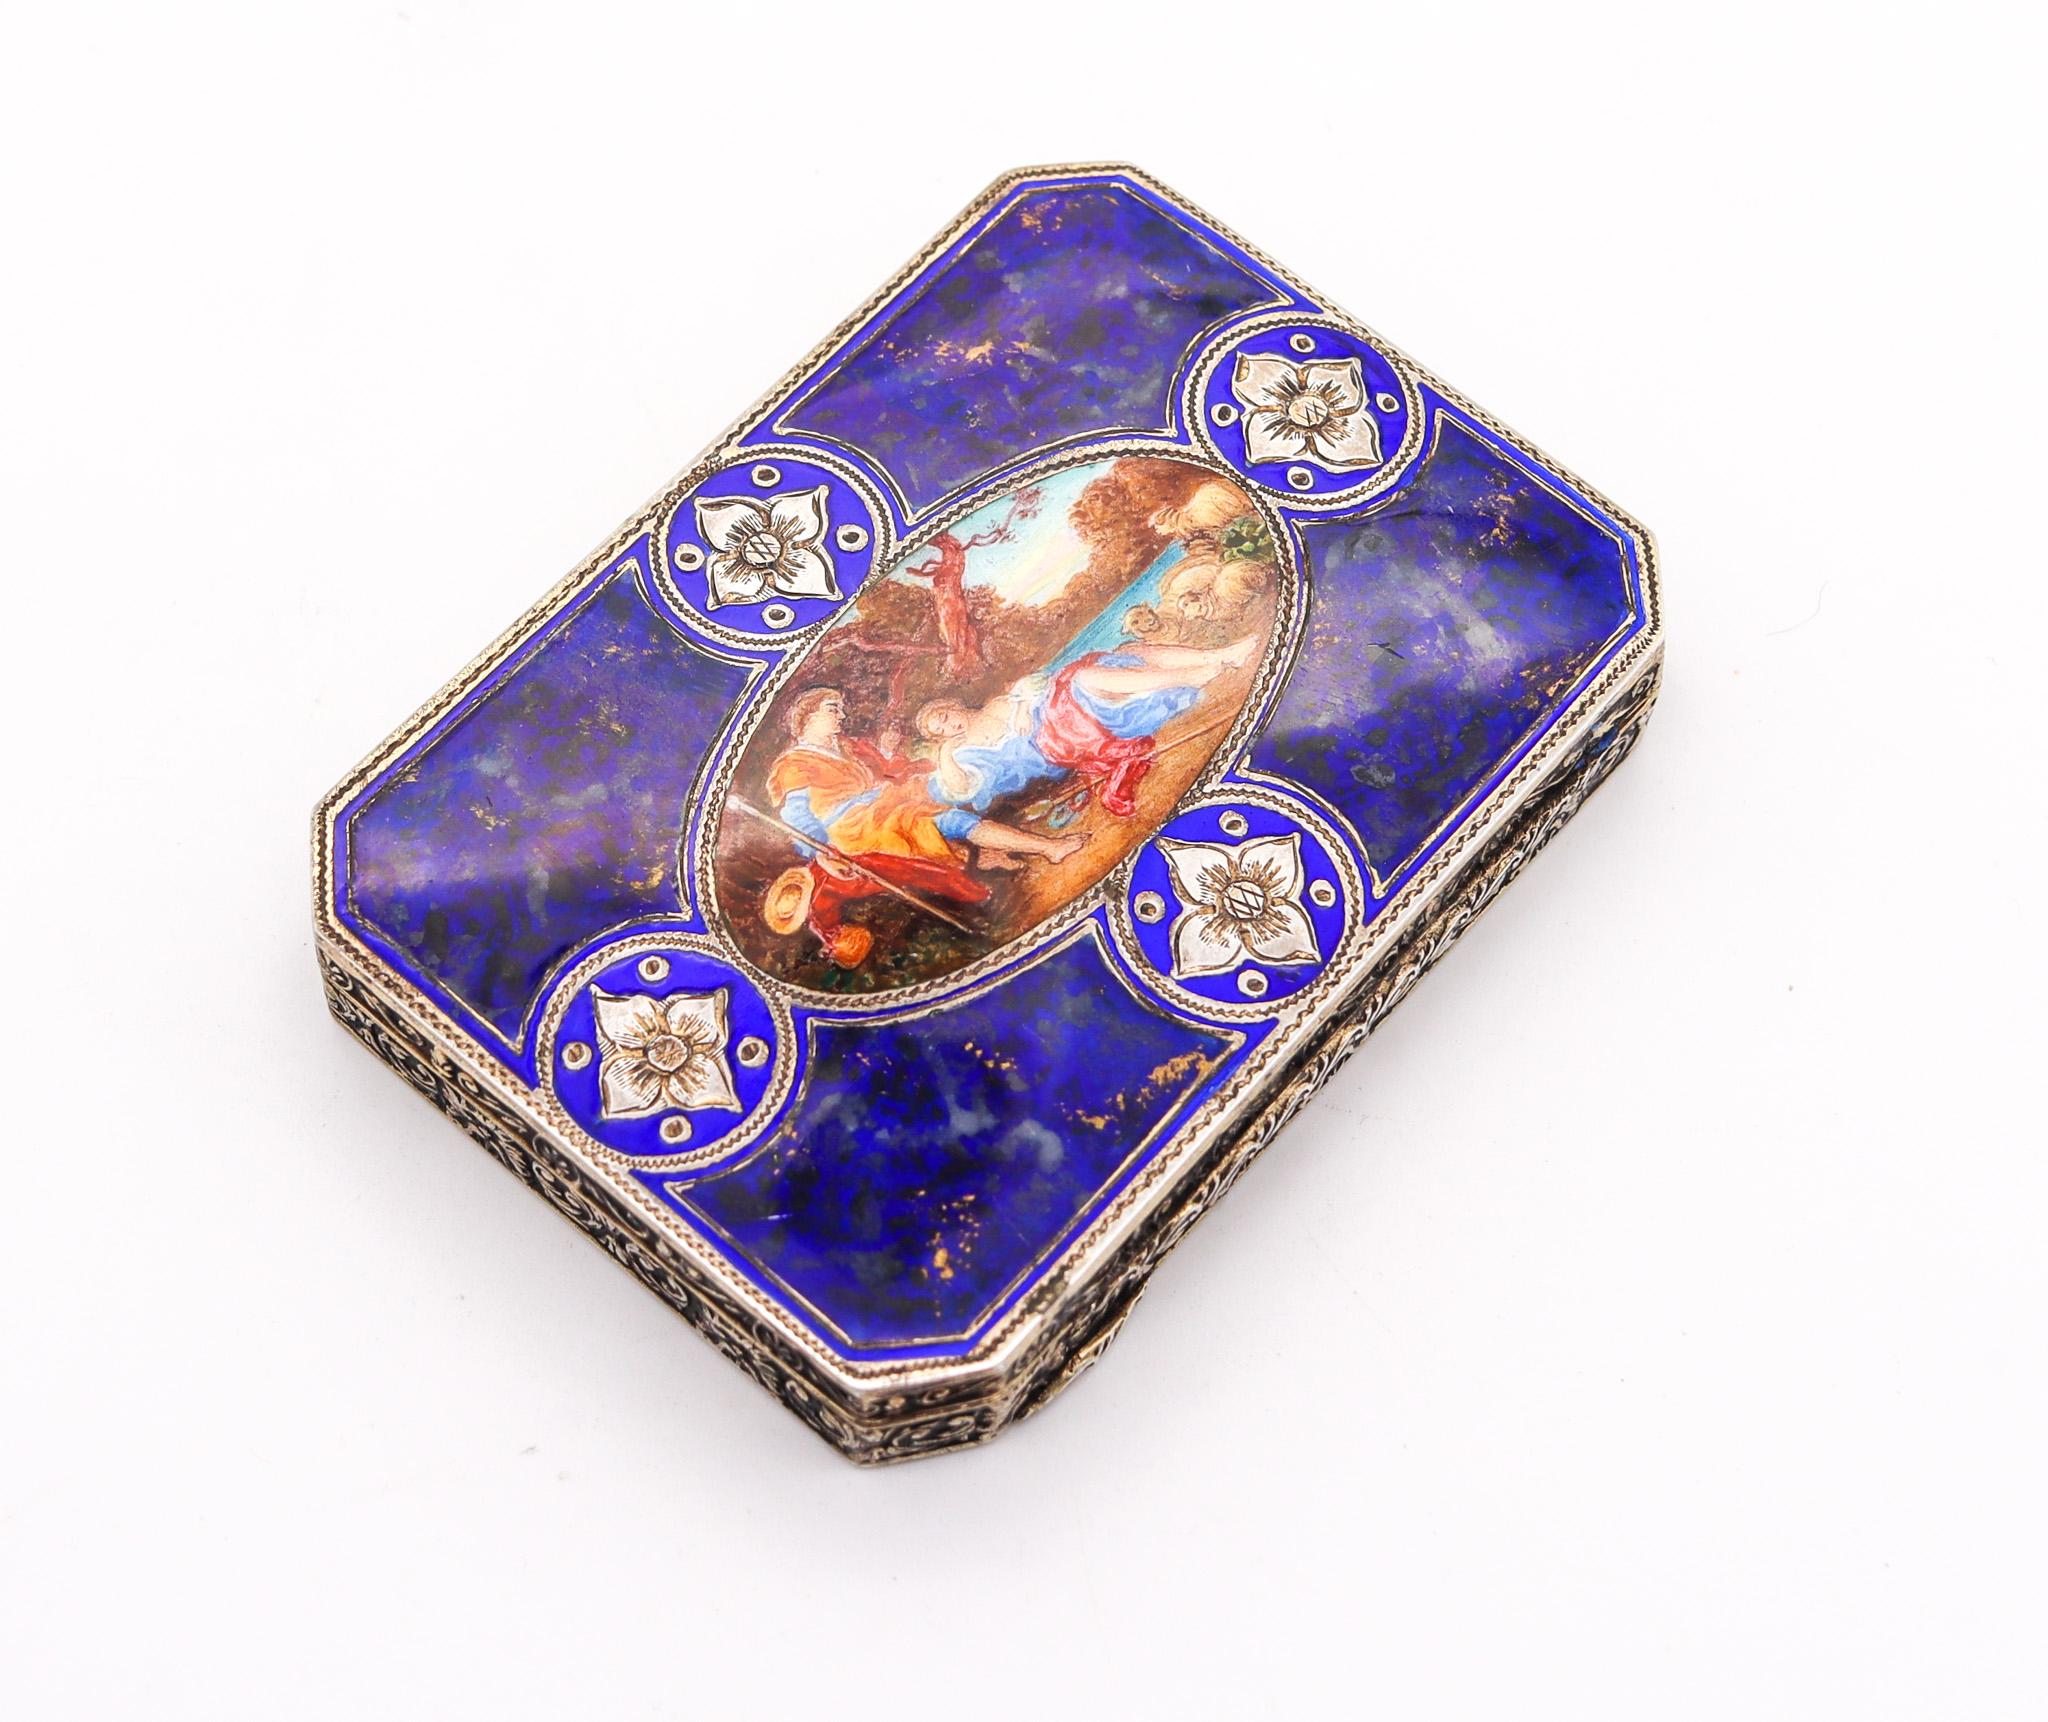 An Italian enamelled snuff box.

Colorful box, created in Italy, back in the 1920. It was crafted in an octagonal shape with neoclassical and renaissance Revival motifs in solid .800/.999 silver and embellished with enamel applications. The